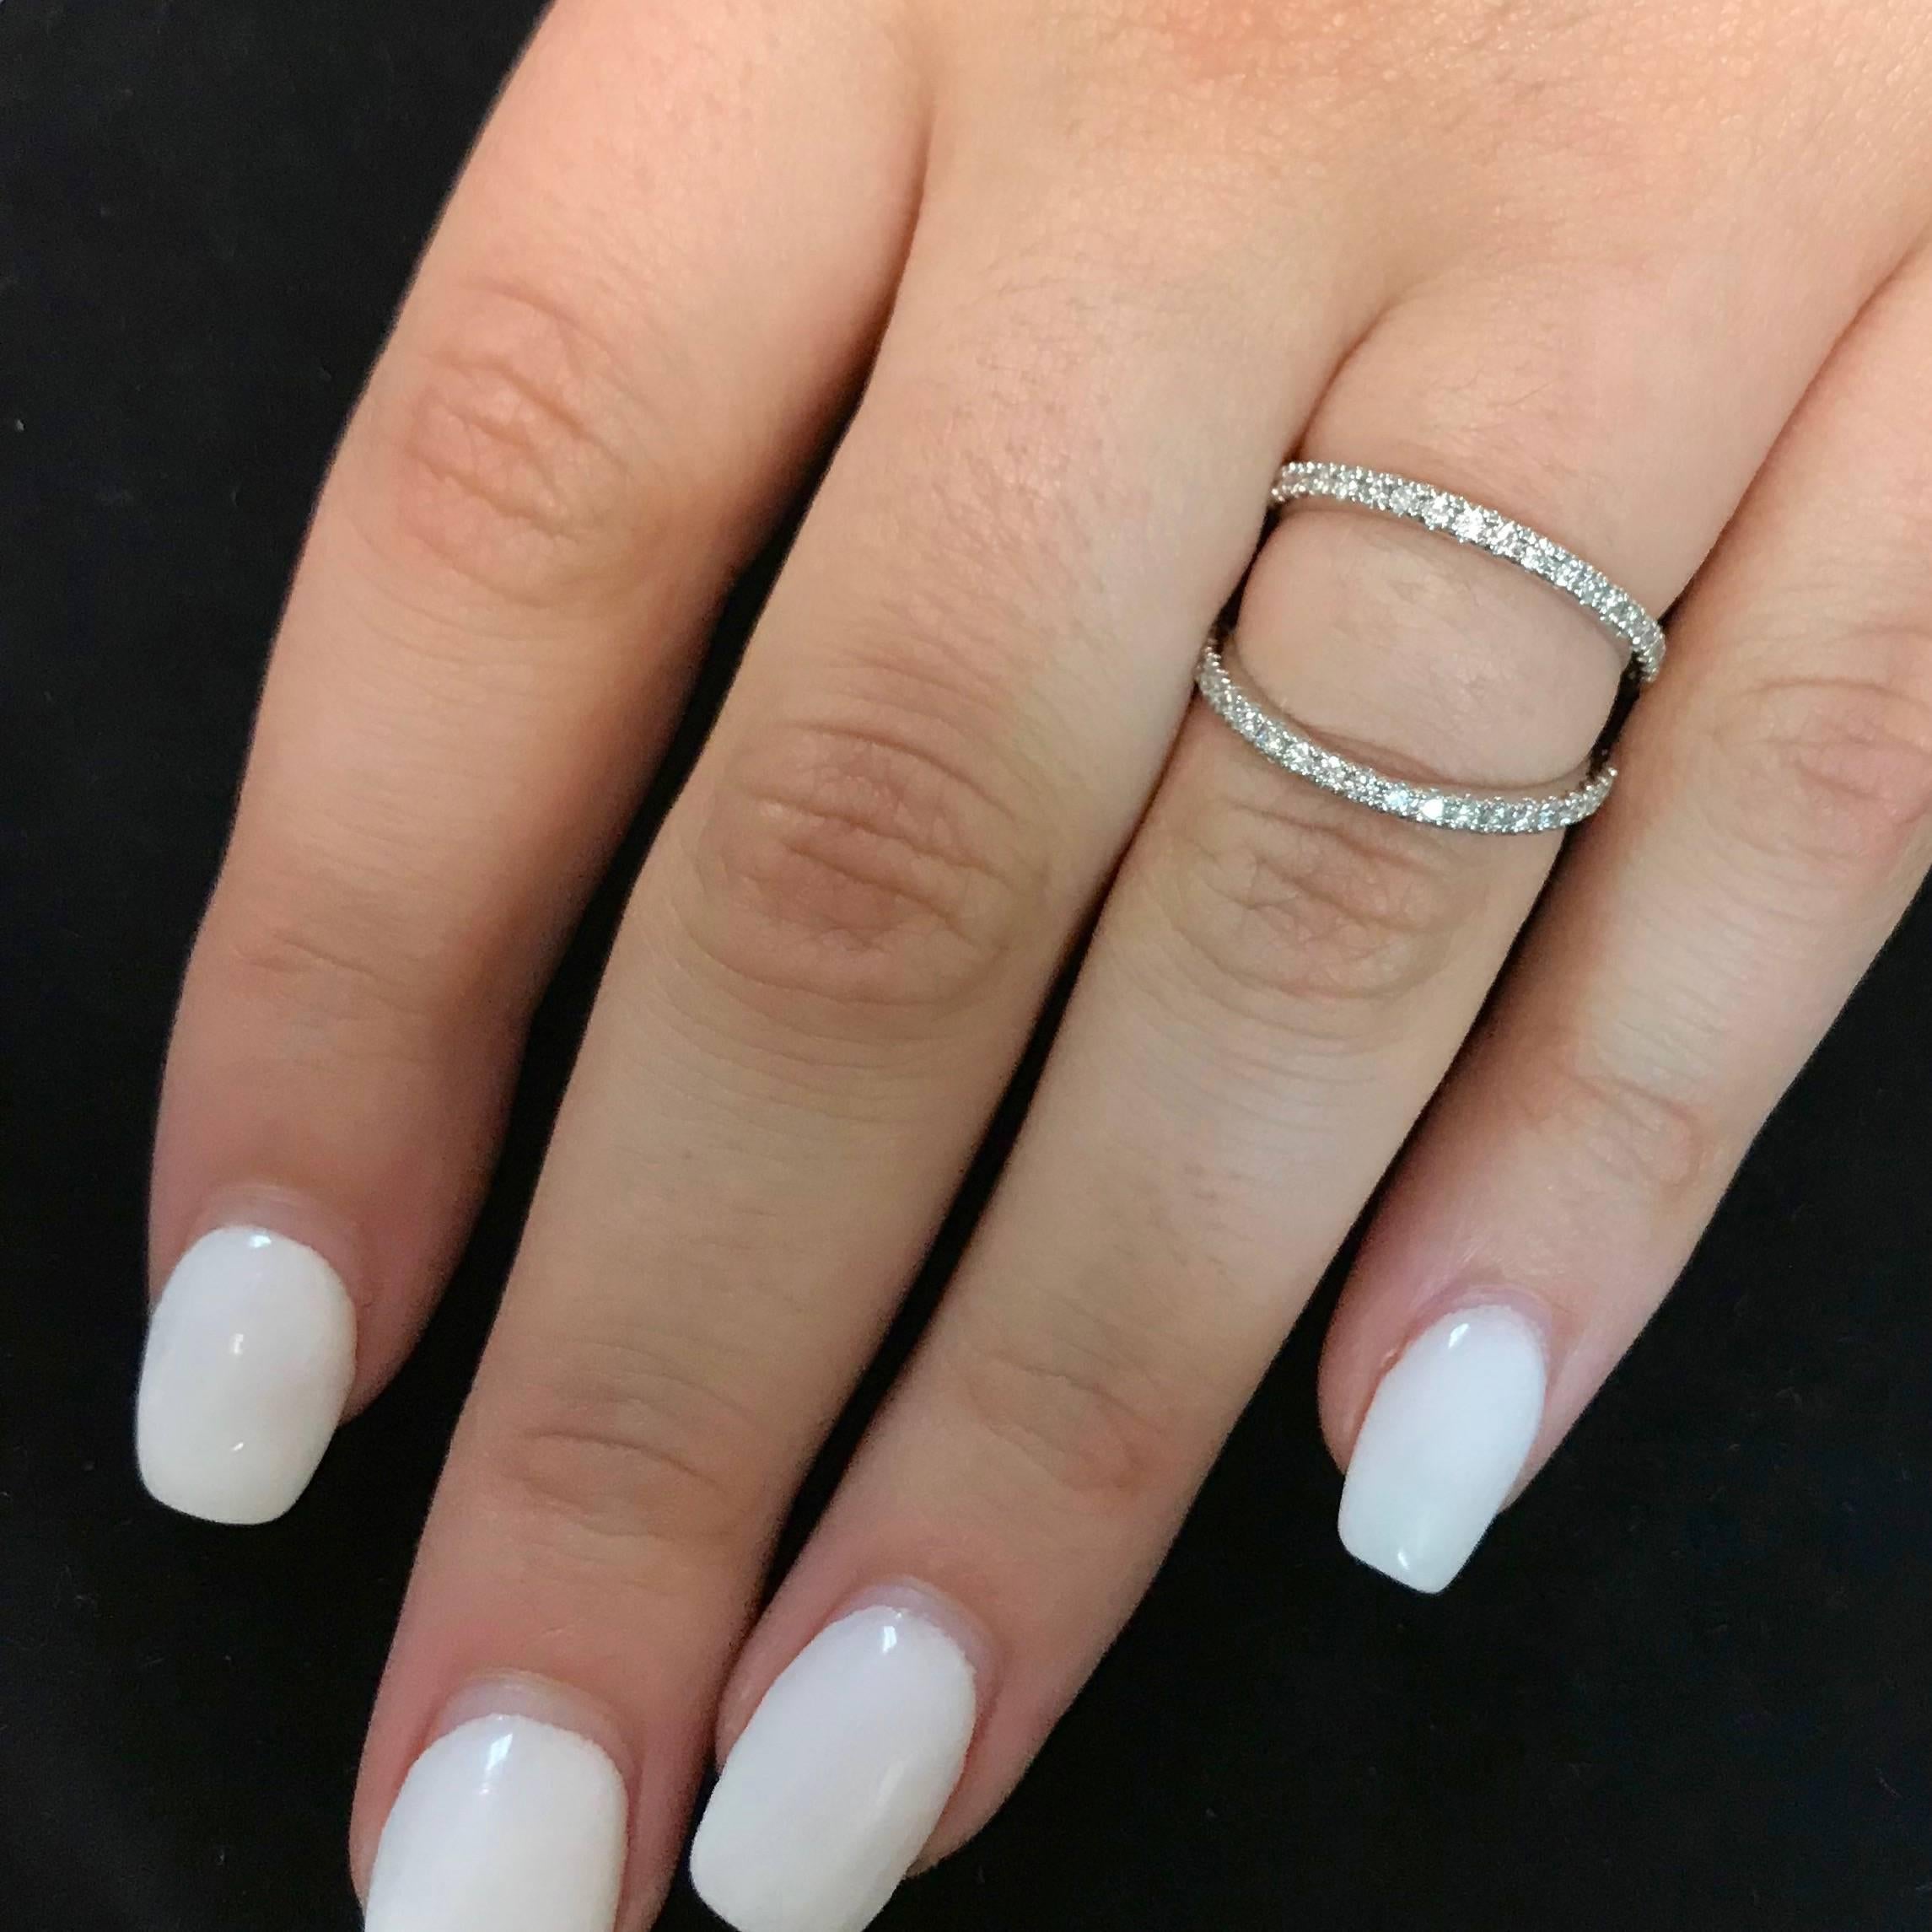 Material: 14k White Gold 
Center Stone Details: 0.42 Carat White Diamonds Clarity: SI1-SI2 / Color: H-I
Ring Size: Size 6. Alberto offers complimentary sizing on all rings.

Fine one-of-a-kind craftsmanship meets incredible quality in this